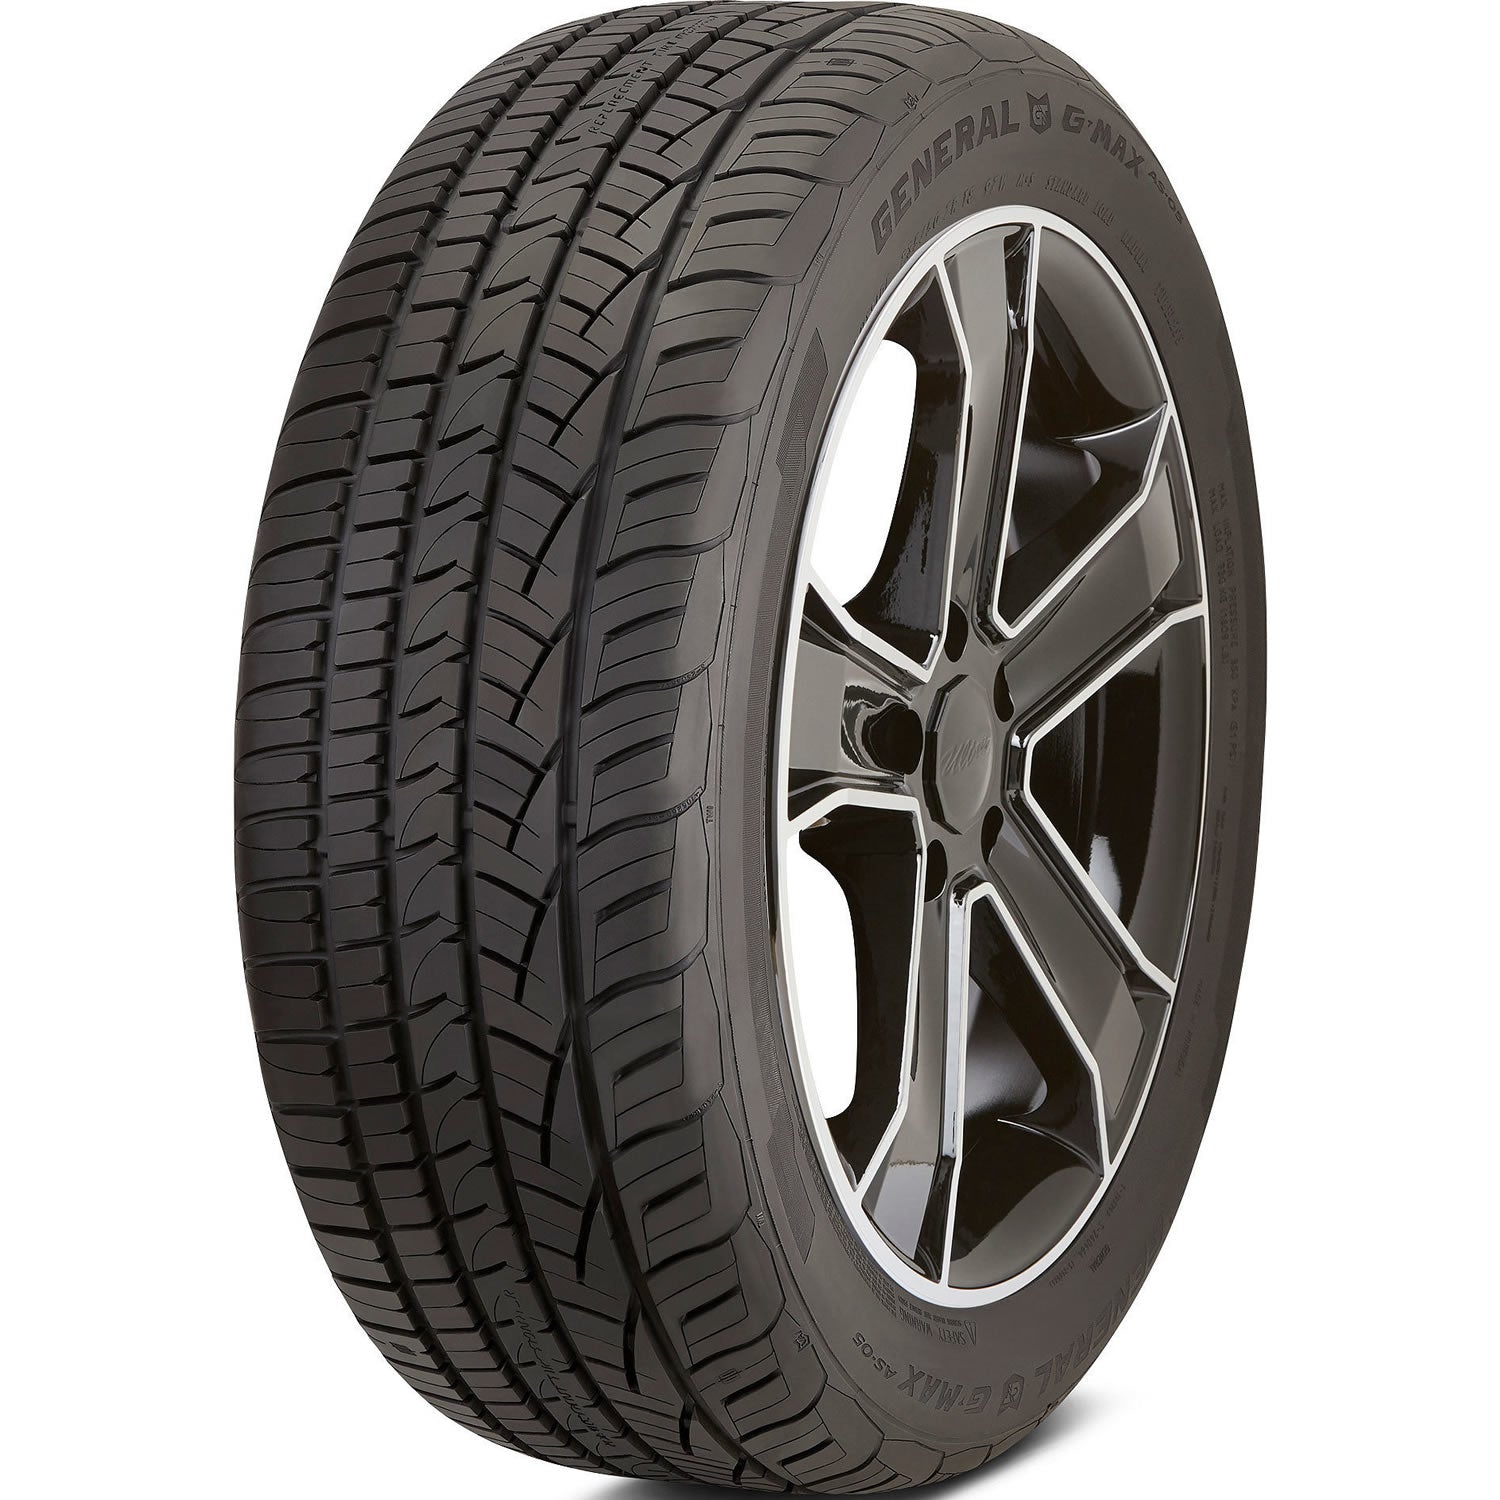 GENERAL G-MAX AS-05 225/50ZR18 (26.9X8.9R 18) Tires